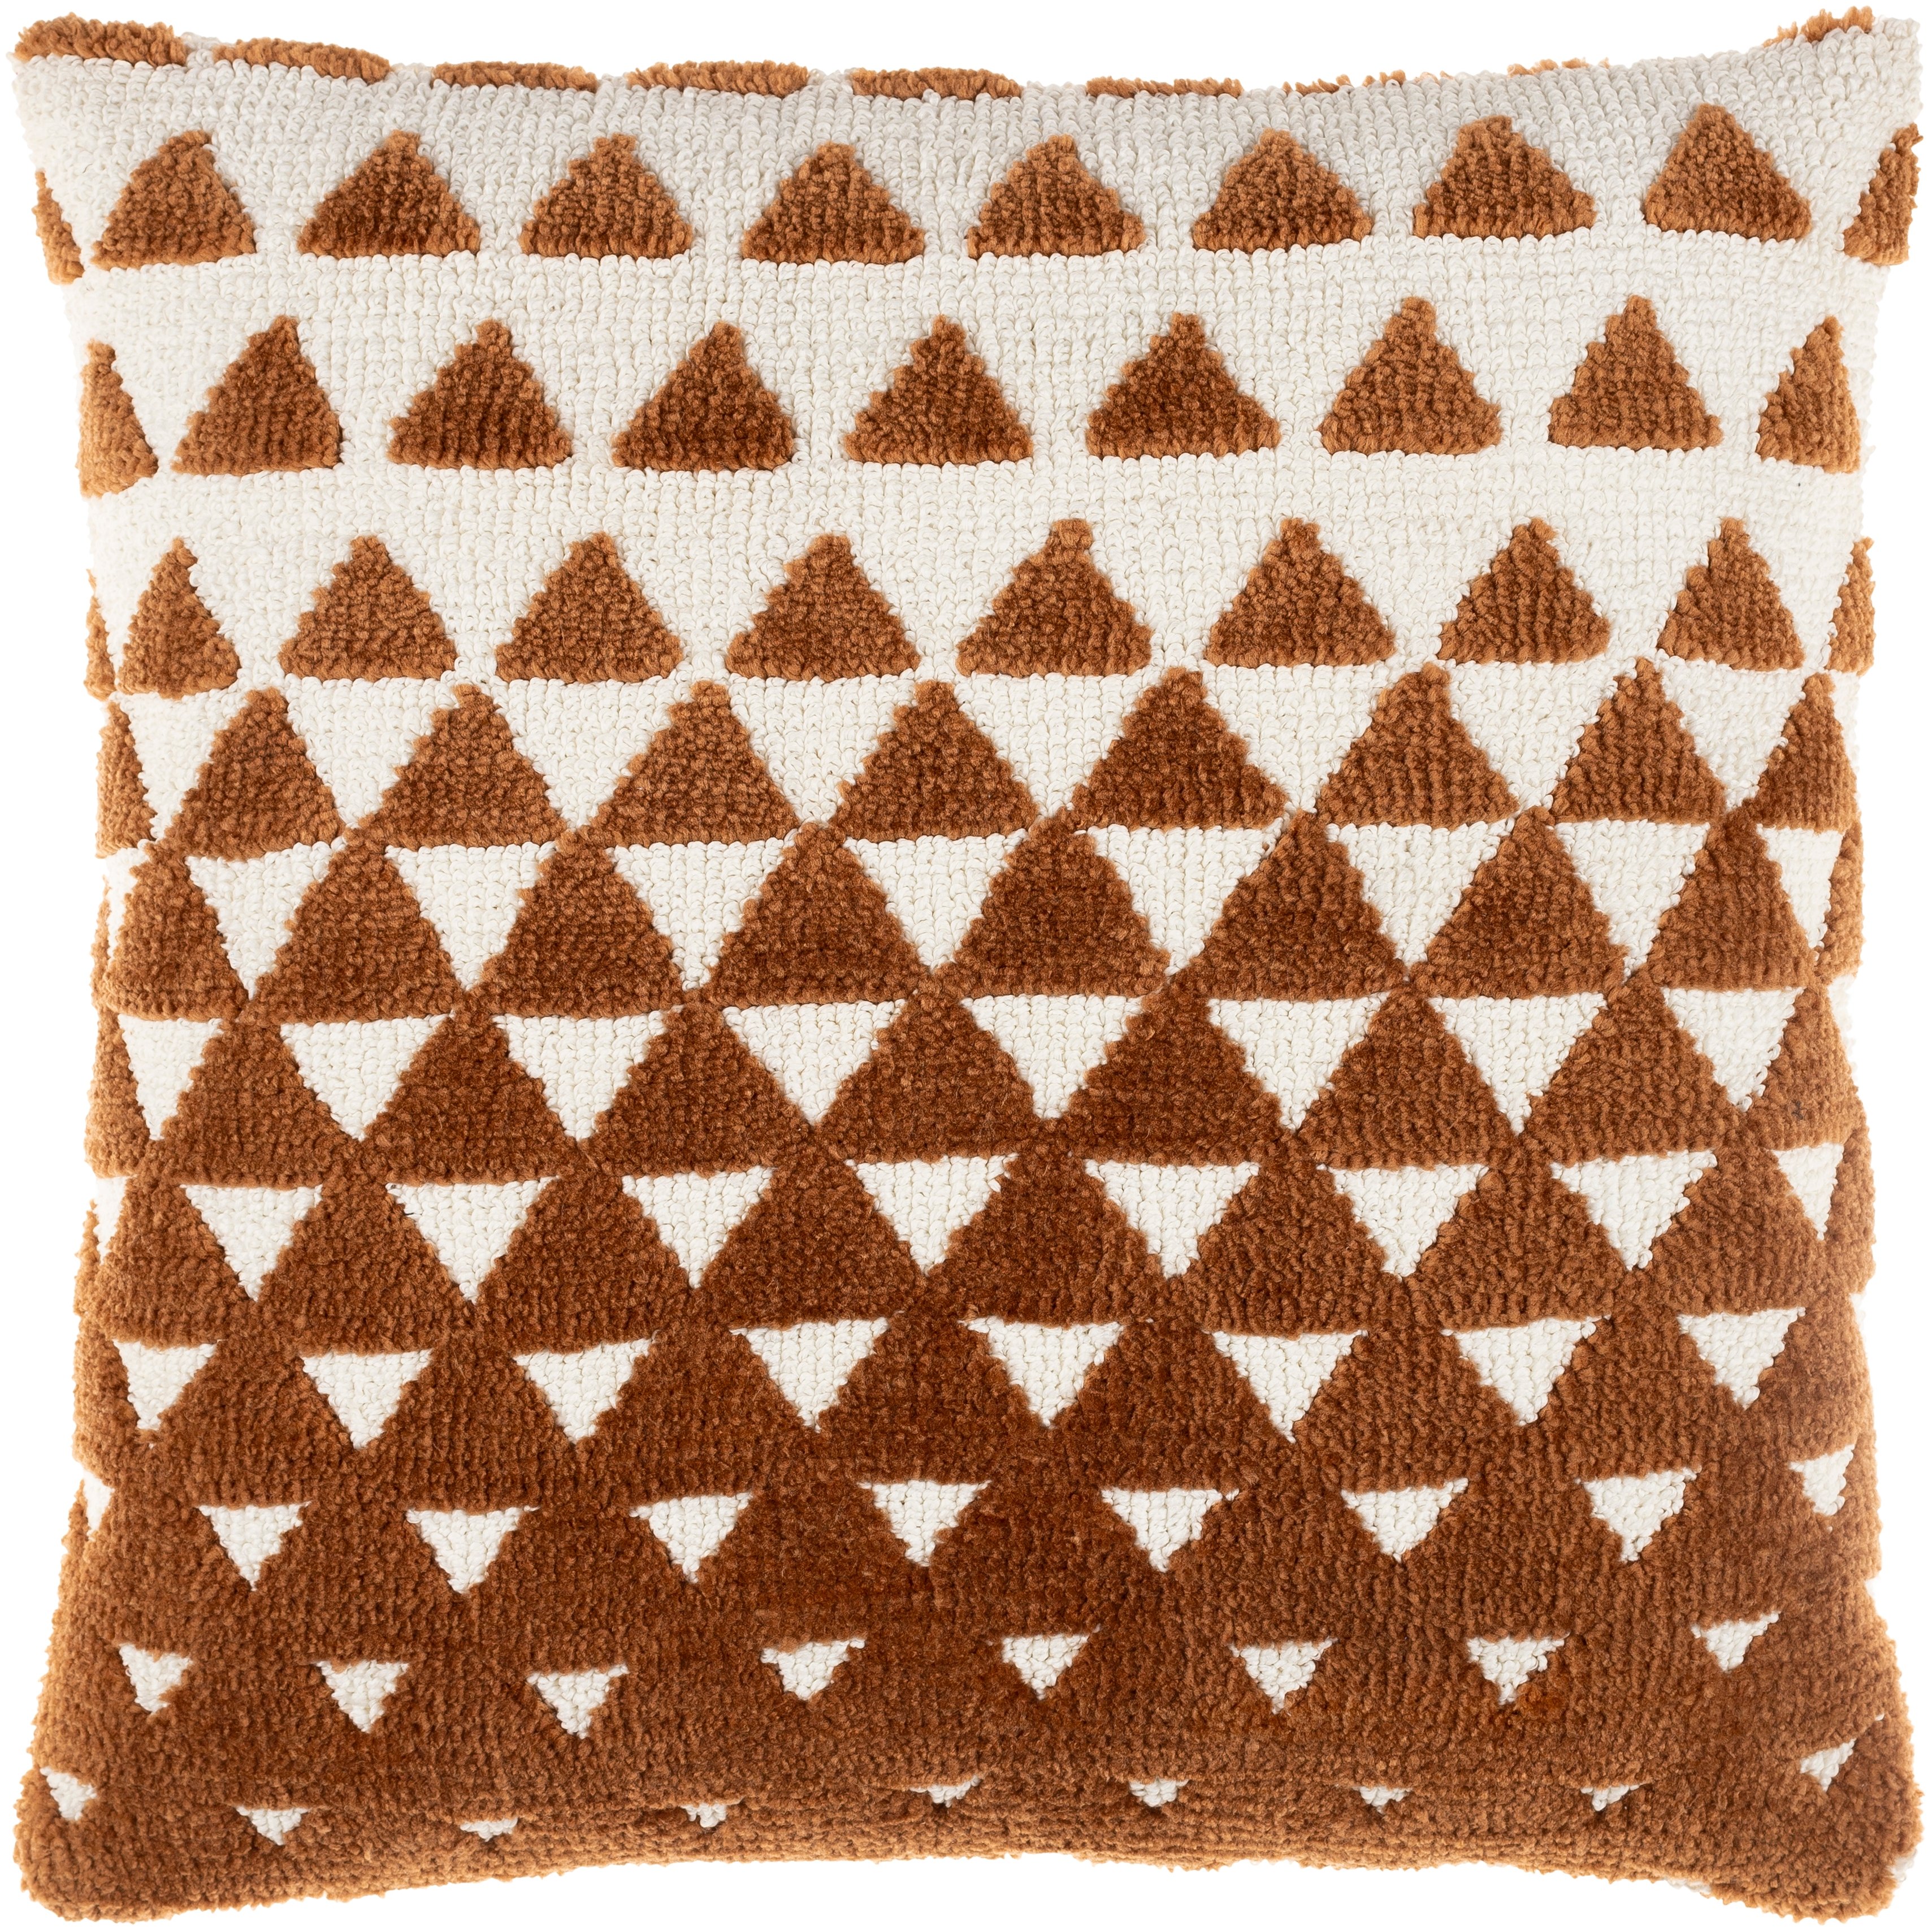 Kabela - KBL-001 - 18"H x 18"W - pillow cover only - Image 0